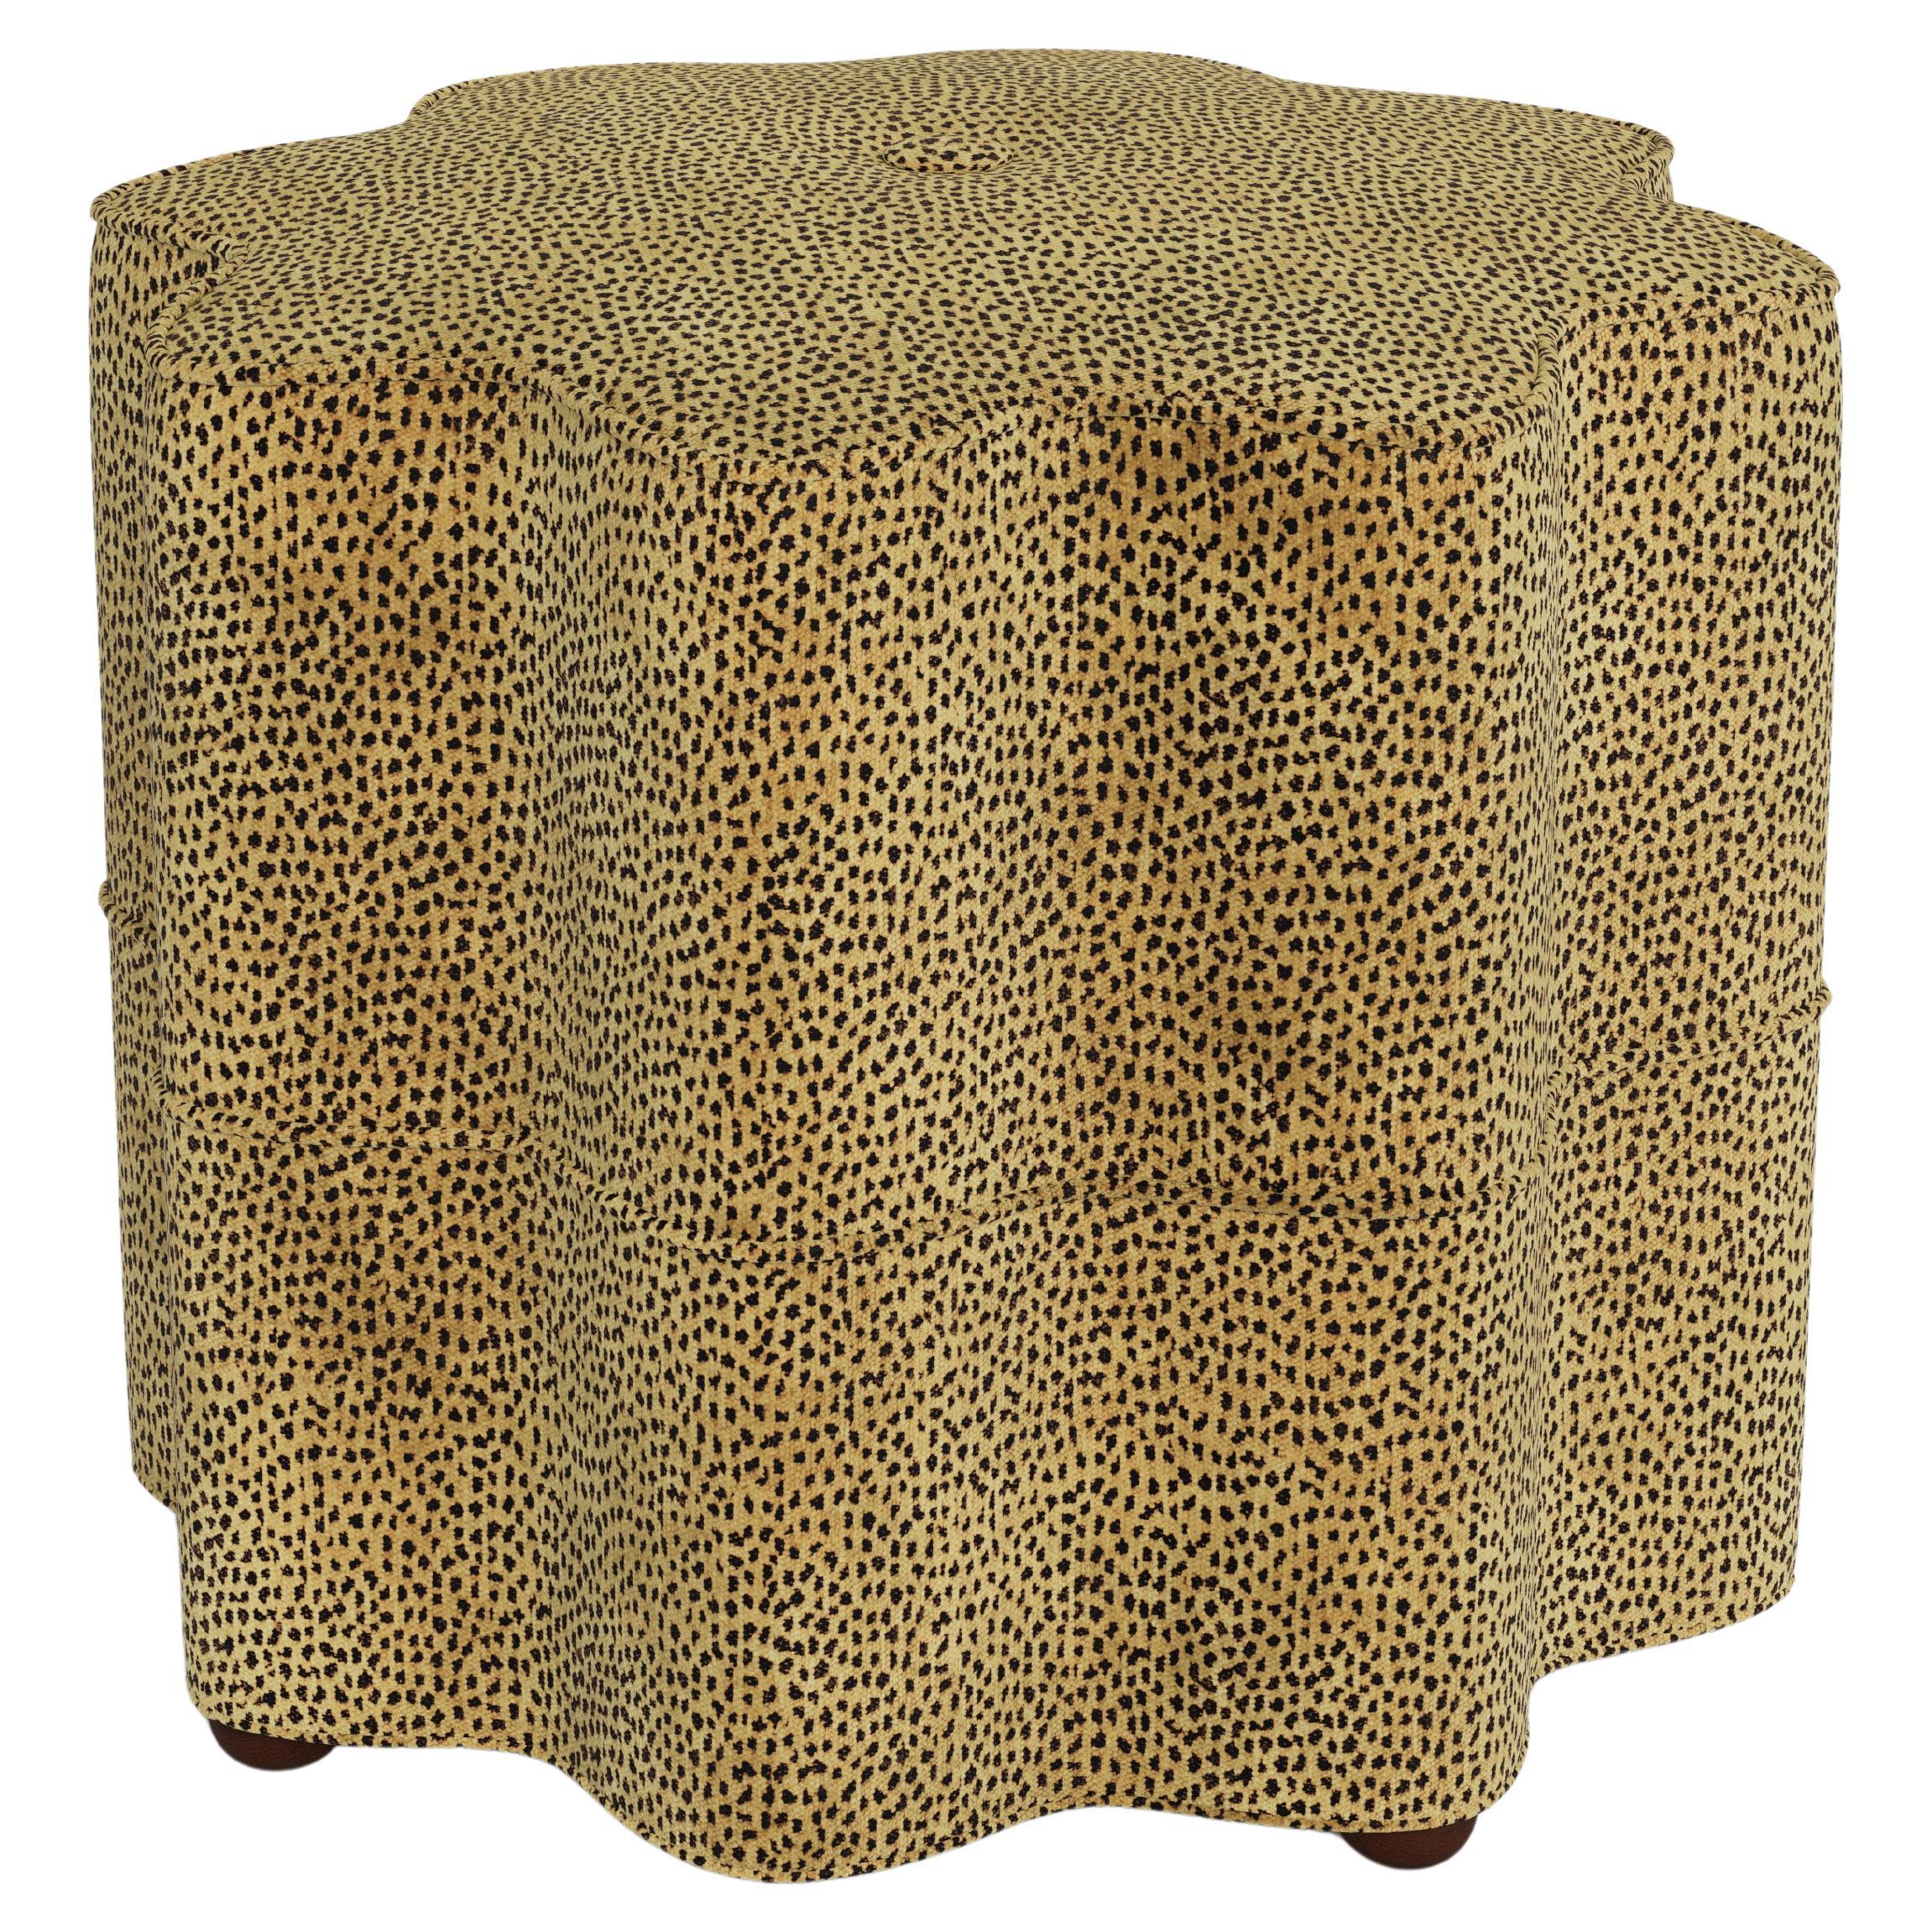 Bunny Williams Home Stella Stool, Leopard Chenille/Natural For Sale